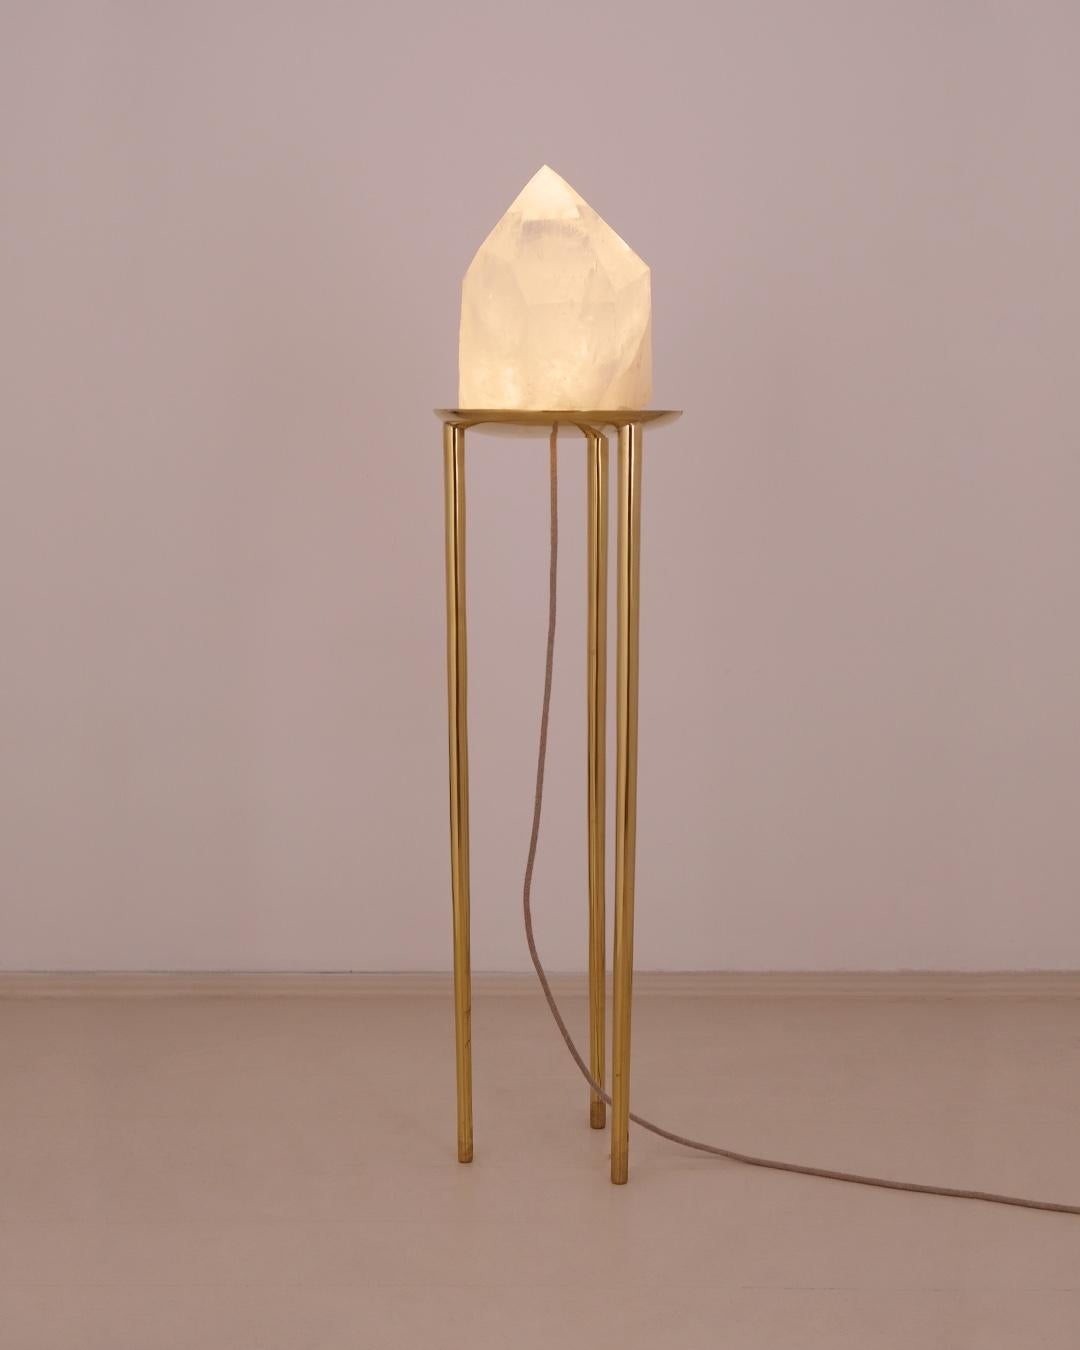 Altar II
Contemporary golden floor lamp, in cast brass and illuminated raw crystal.
Produced in São Paulo, Brazil.

This golden floor lamp was meticulously handmade by master artisans one delicate piece at a time. It is therefore quite difficult, if